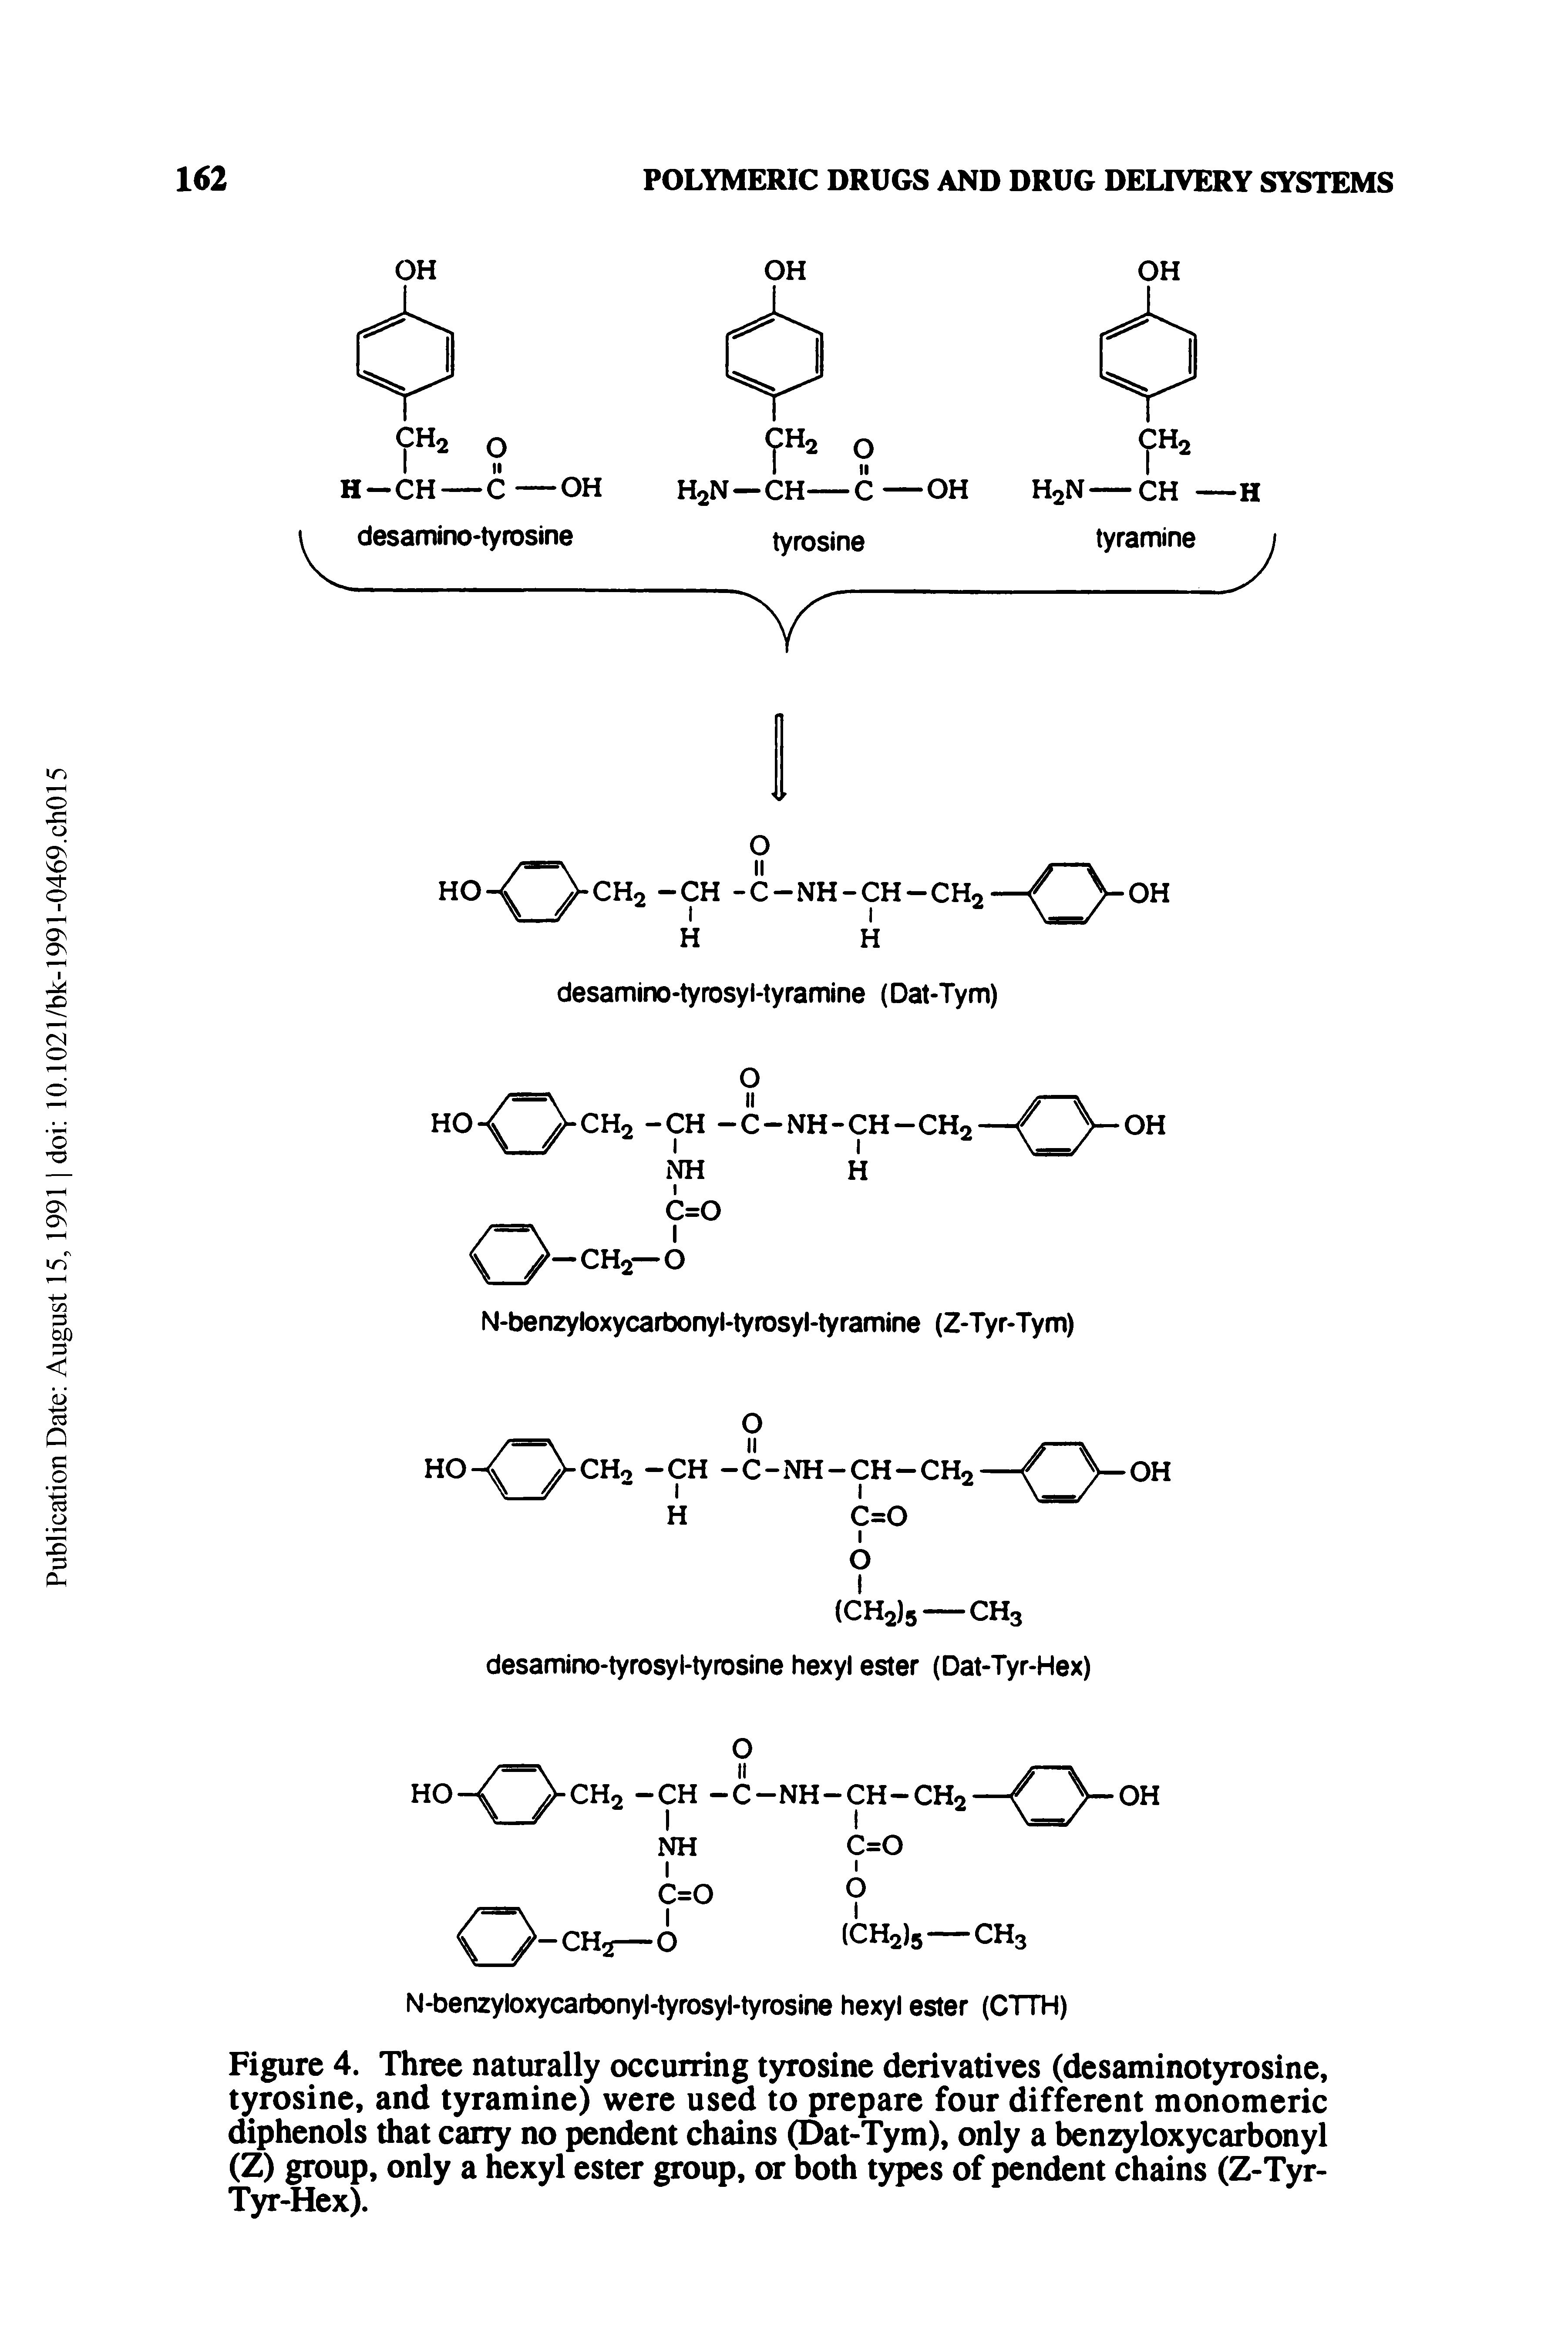 Figure 4. Three naturally occurring tyrosine derivatives (desaminotyrosine, tyrosine, and tyramine) were used to prepare four different monomeric diphenols that carry no pendent chains (Dat-Tym), only a benzyloxycarbonyl (Z) group, only a hexyl ester group, or both types of pendent chains (Z-Tyr-Tyr-Hex).